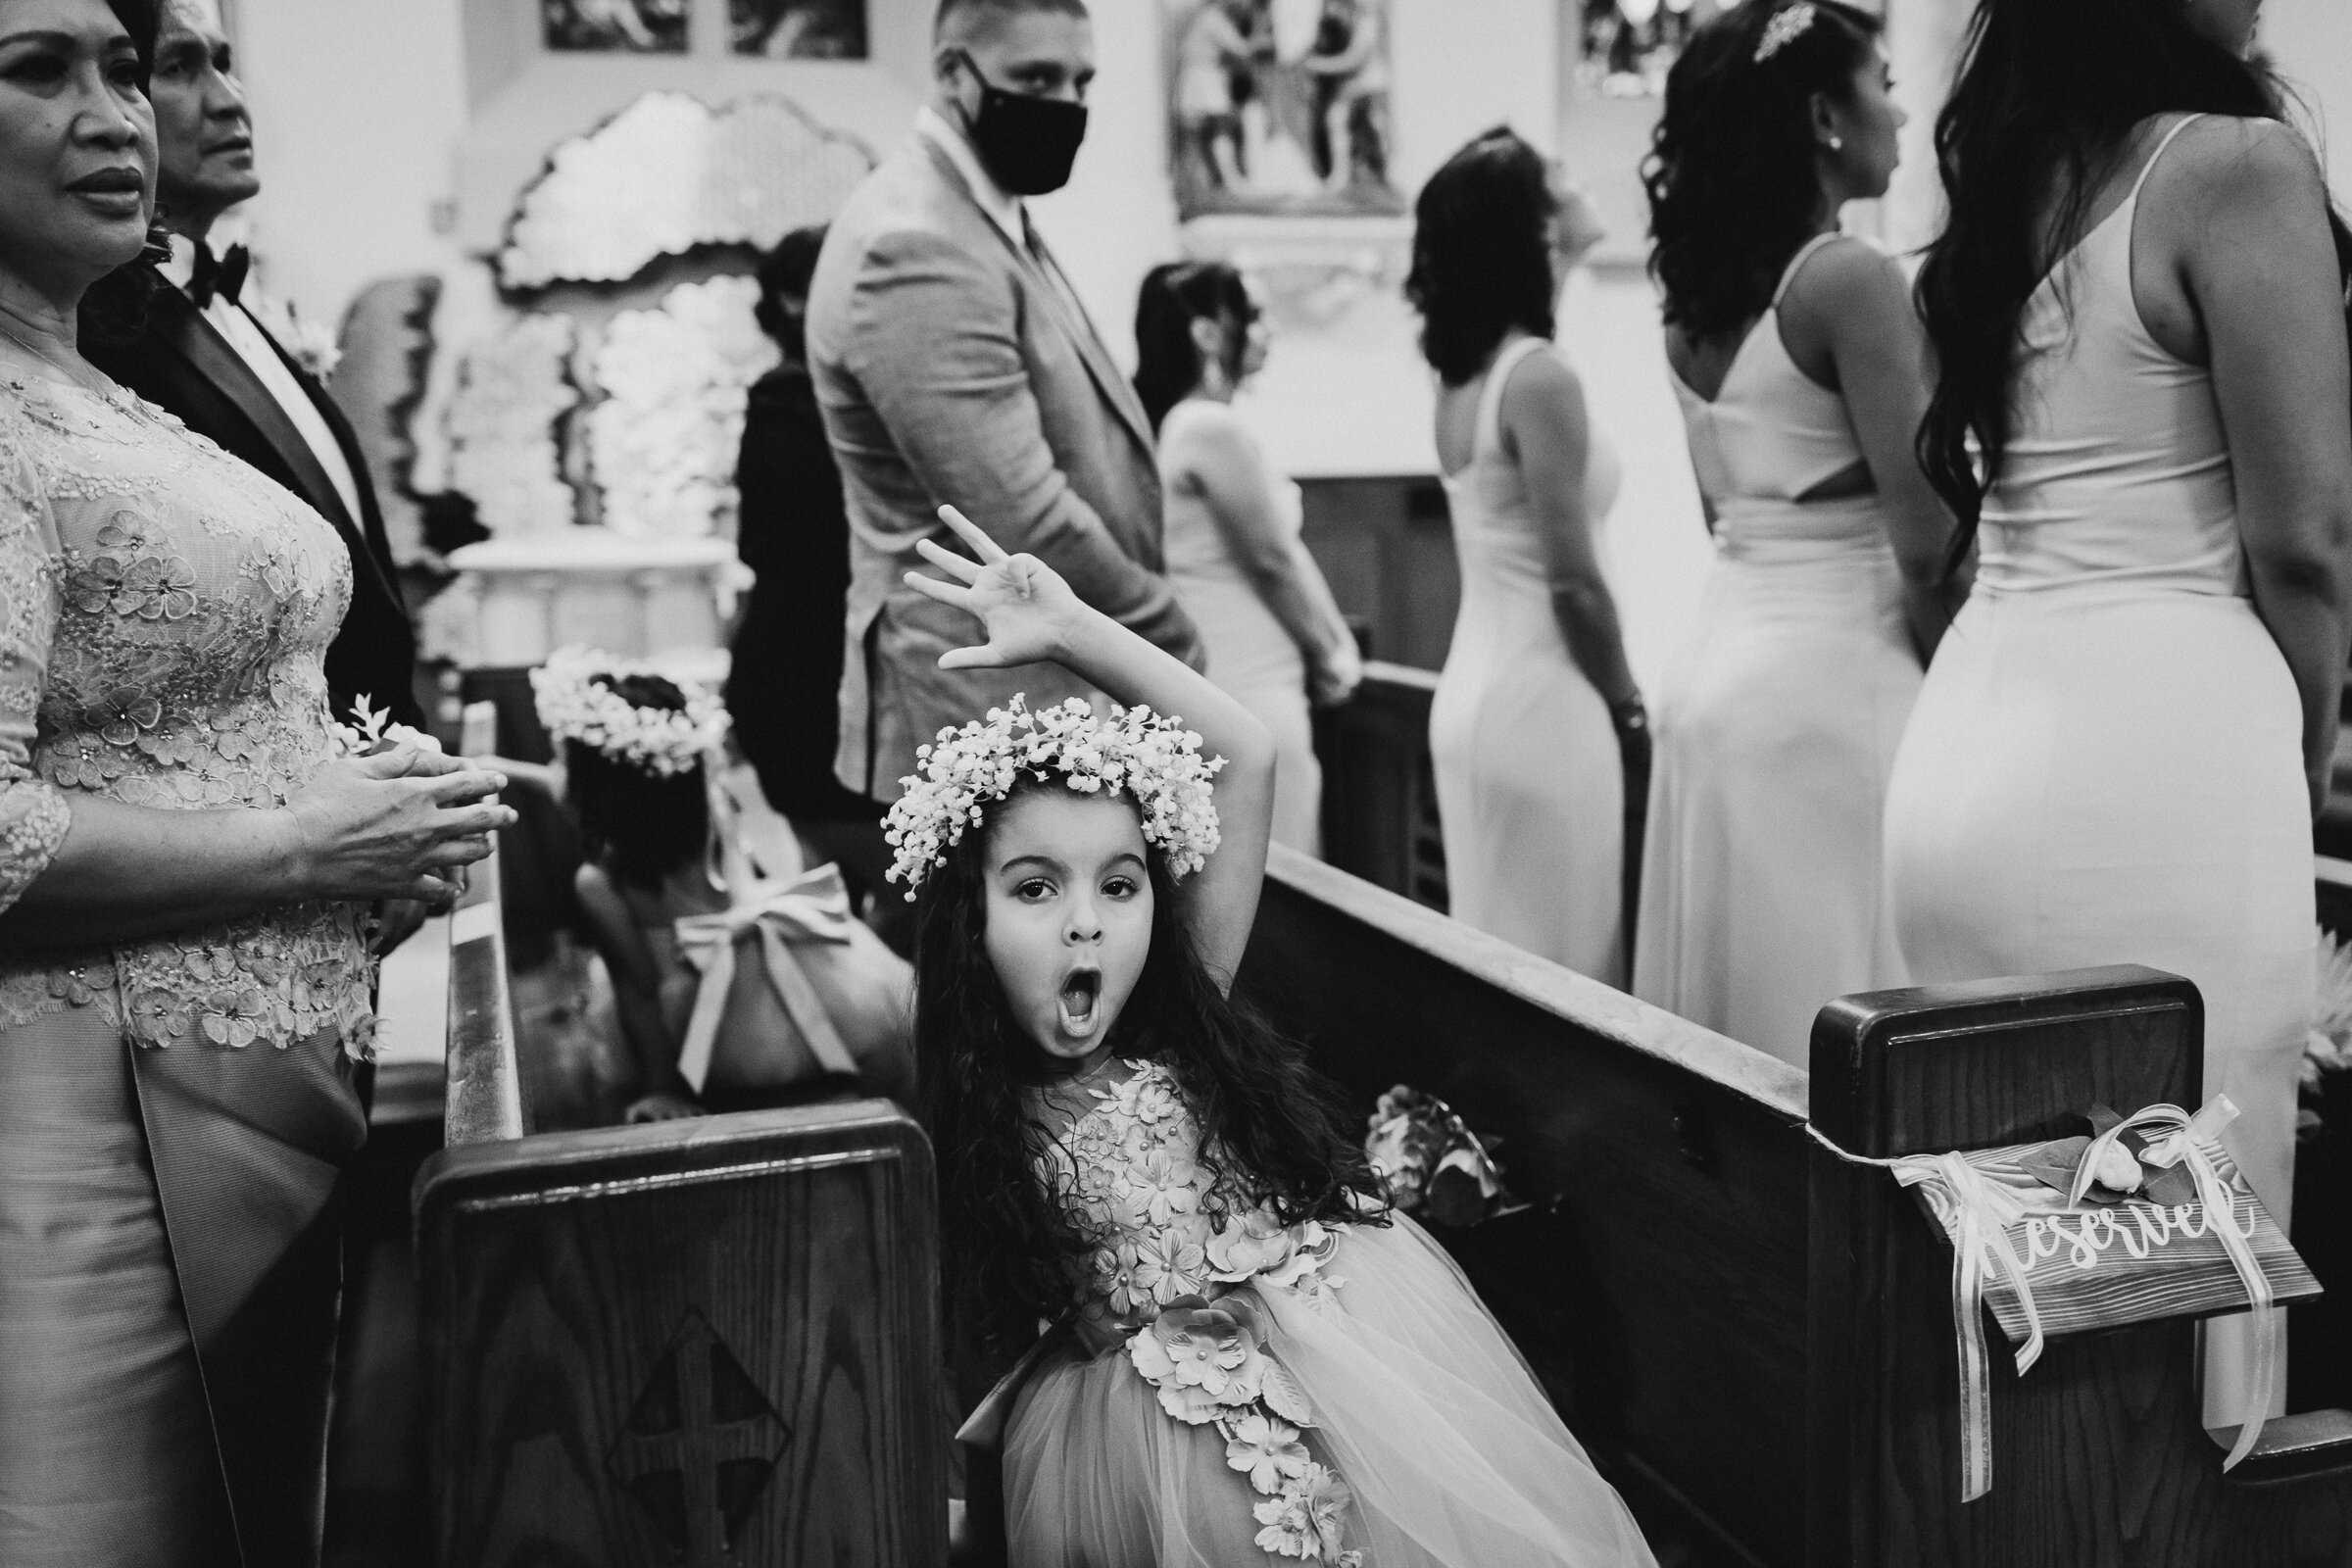 Bored kids at a church ceremony still remained a thing in 2020 haha